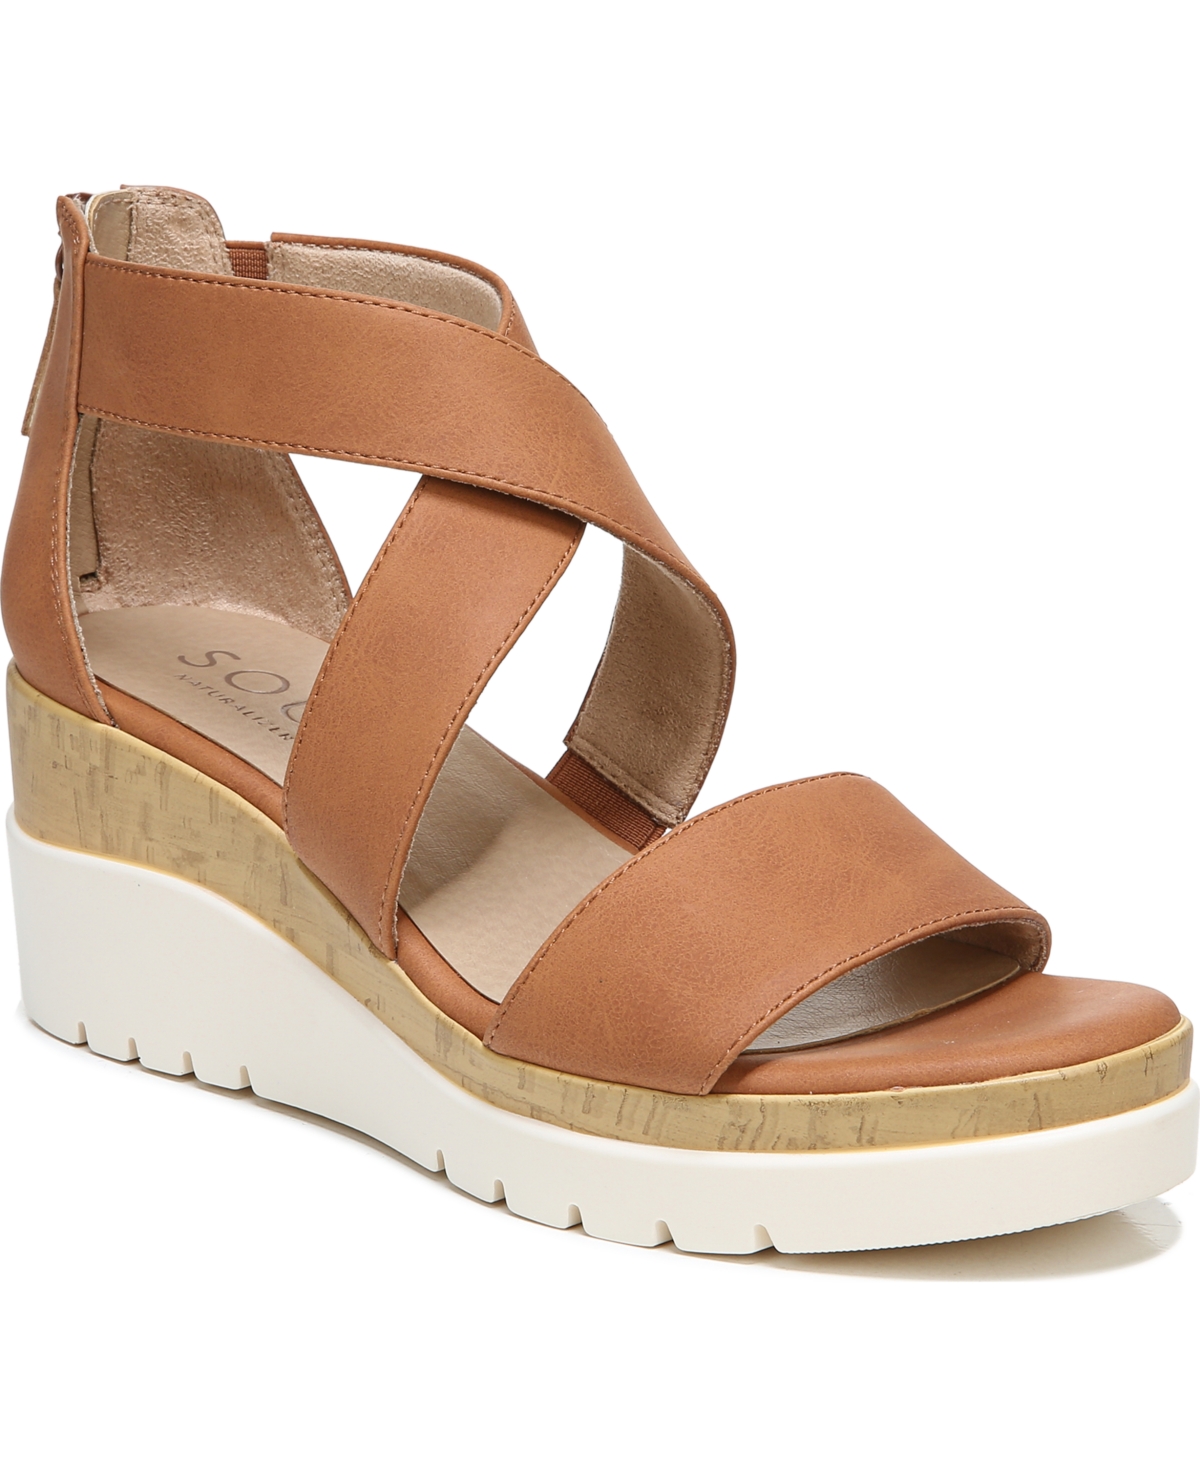 Soul Naturalizer Goodtimes Ankle Strap Wedge Sandals Women's Shoes In Toffee Faux Leather